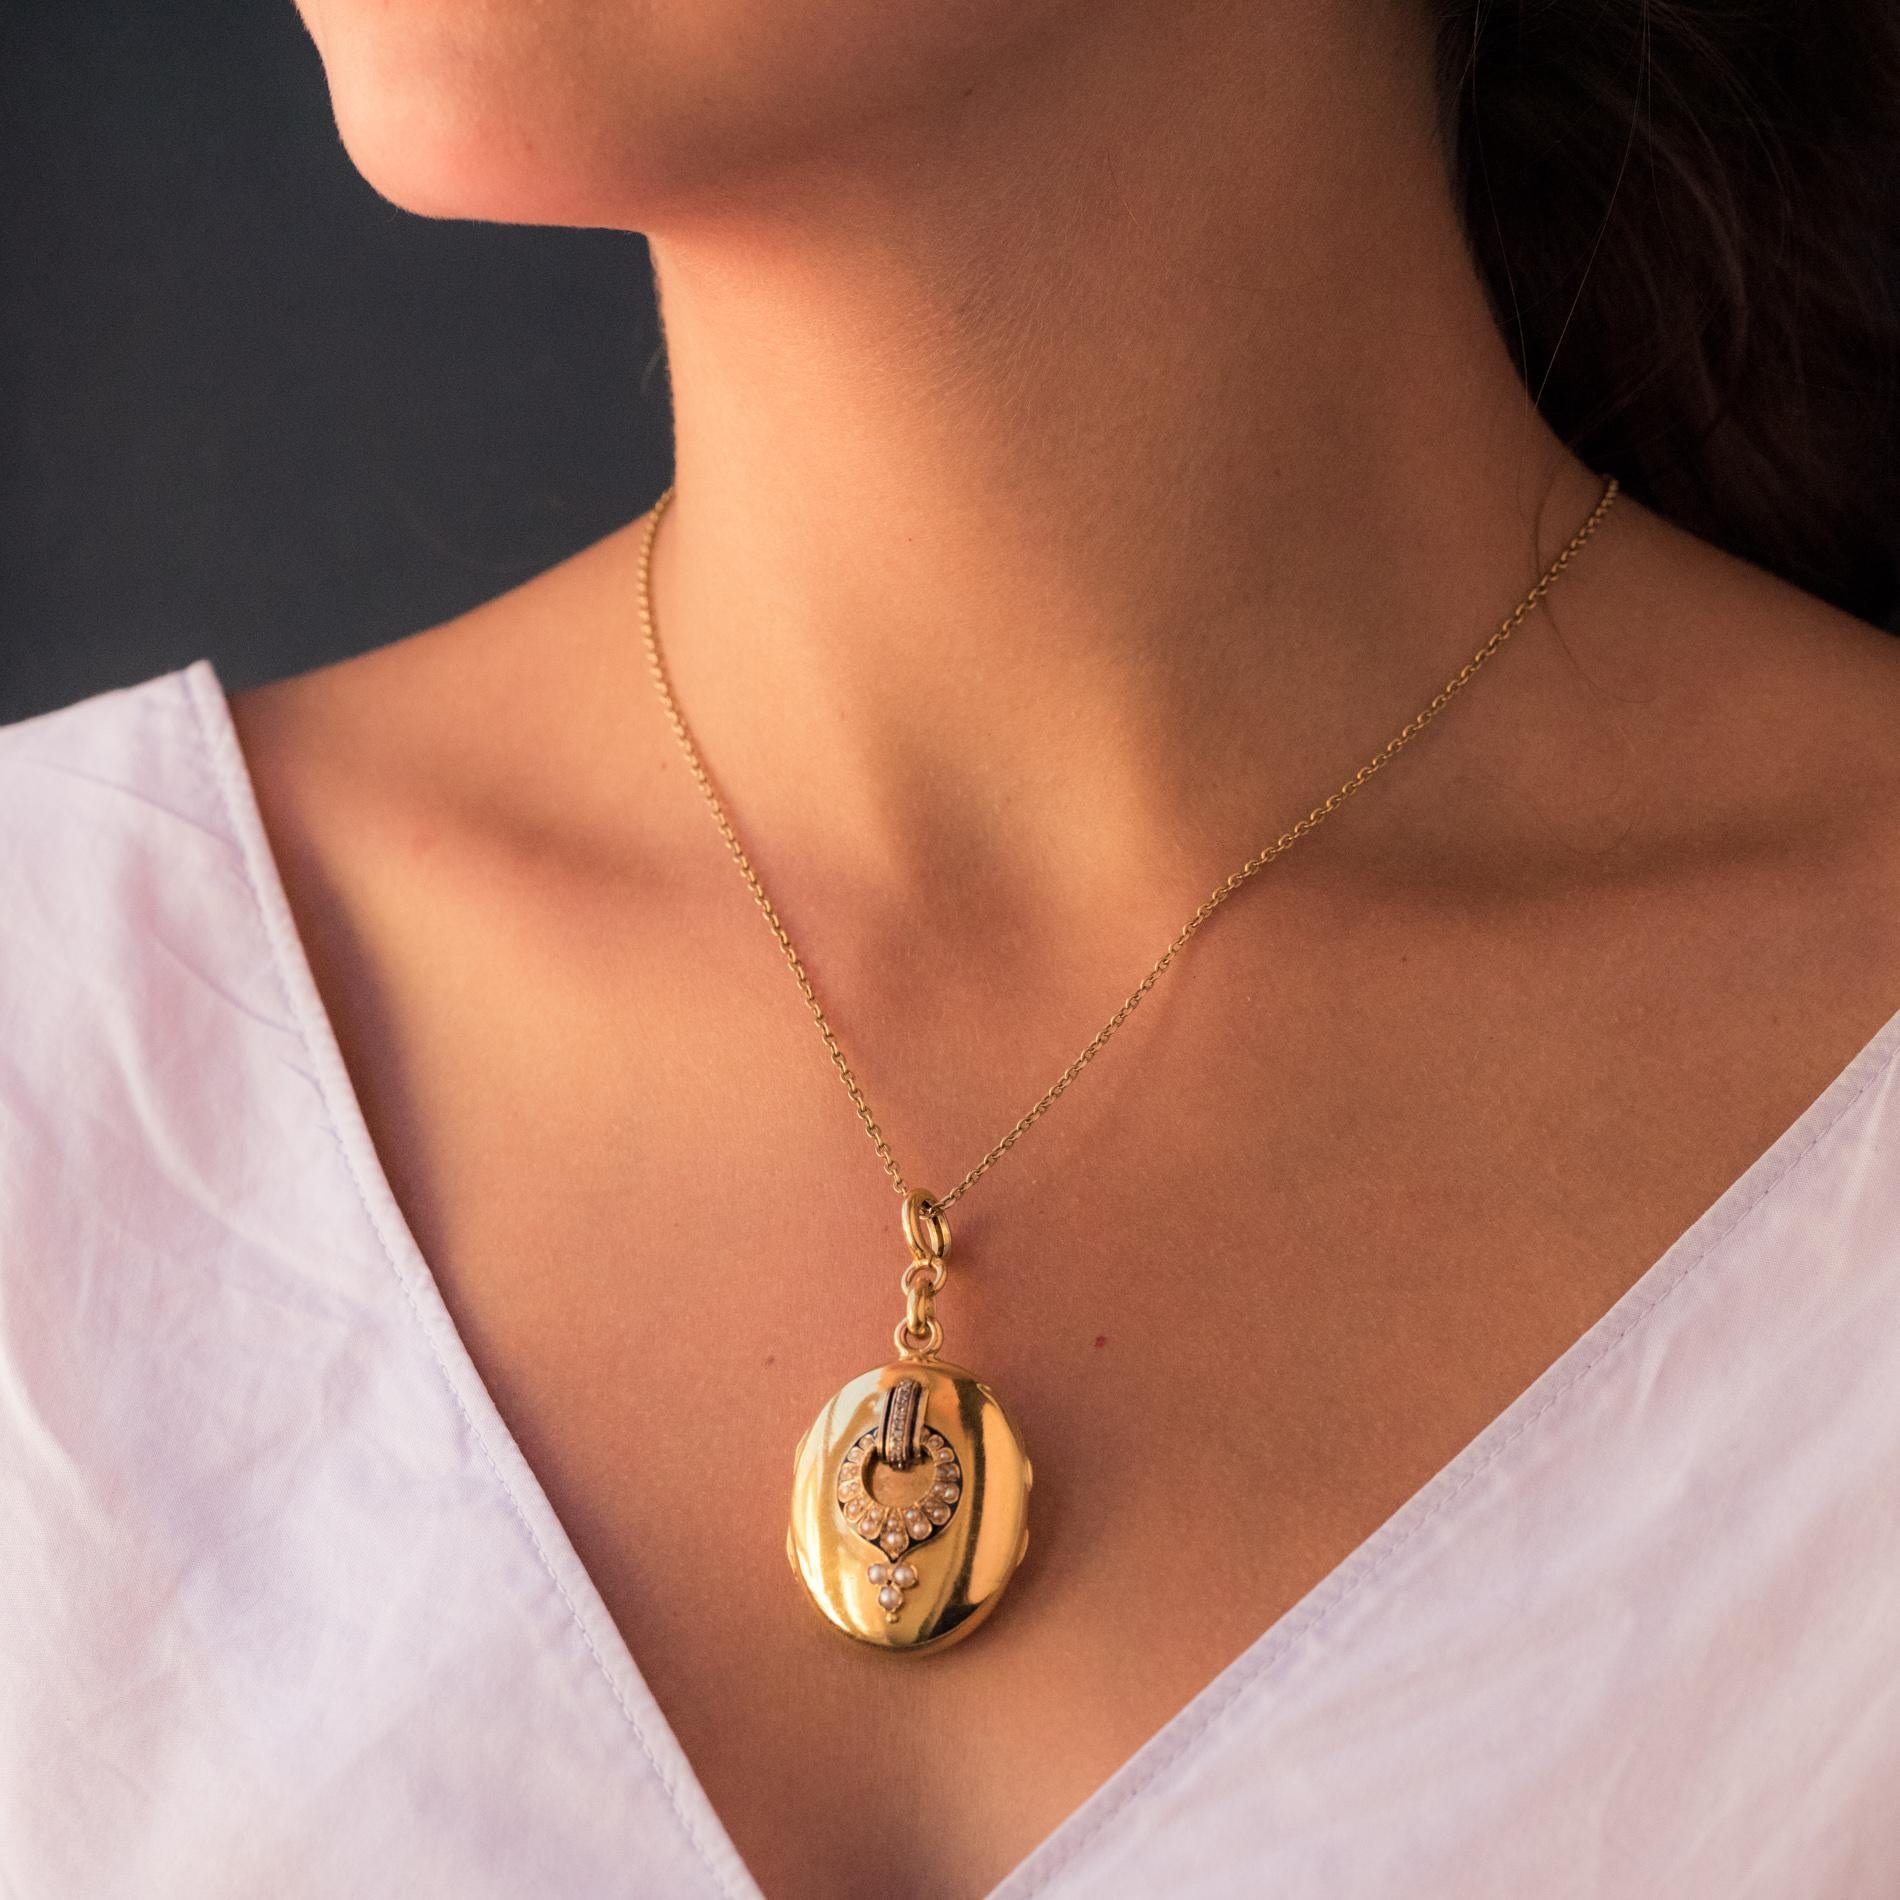 Medallion in 18 karat yellow gold, eagle's head hallmark.
Important antique oval shaped pendant, it is applied on its front face with a black enamelled motif set with half-natural pearls and a line of rose-cut diamonds. The back is smooth. It opens